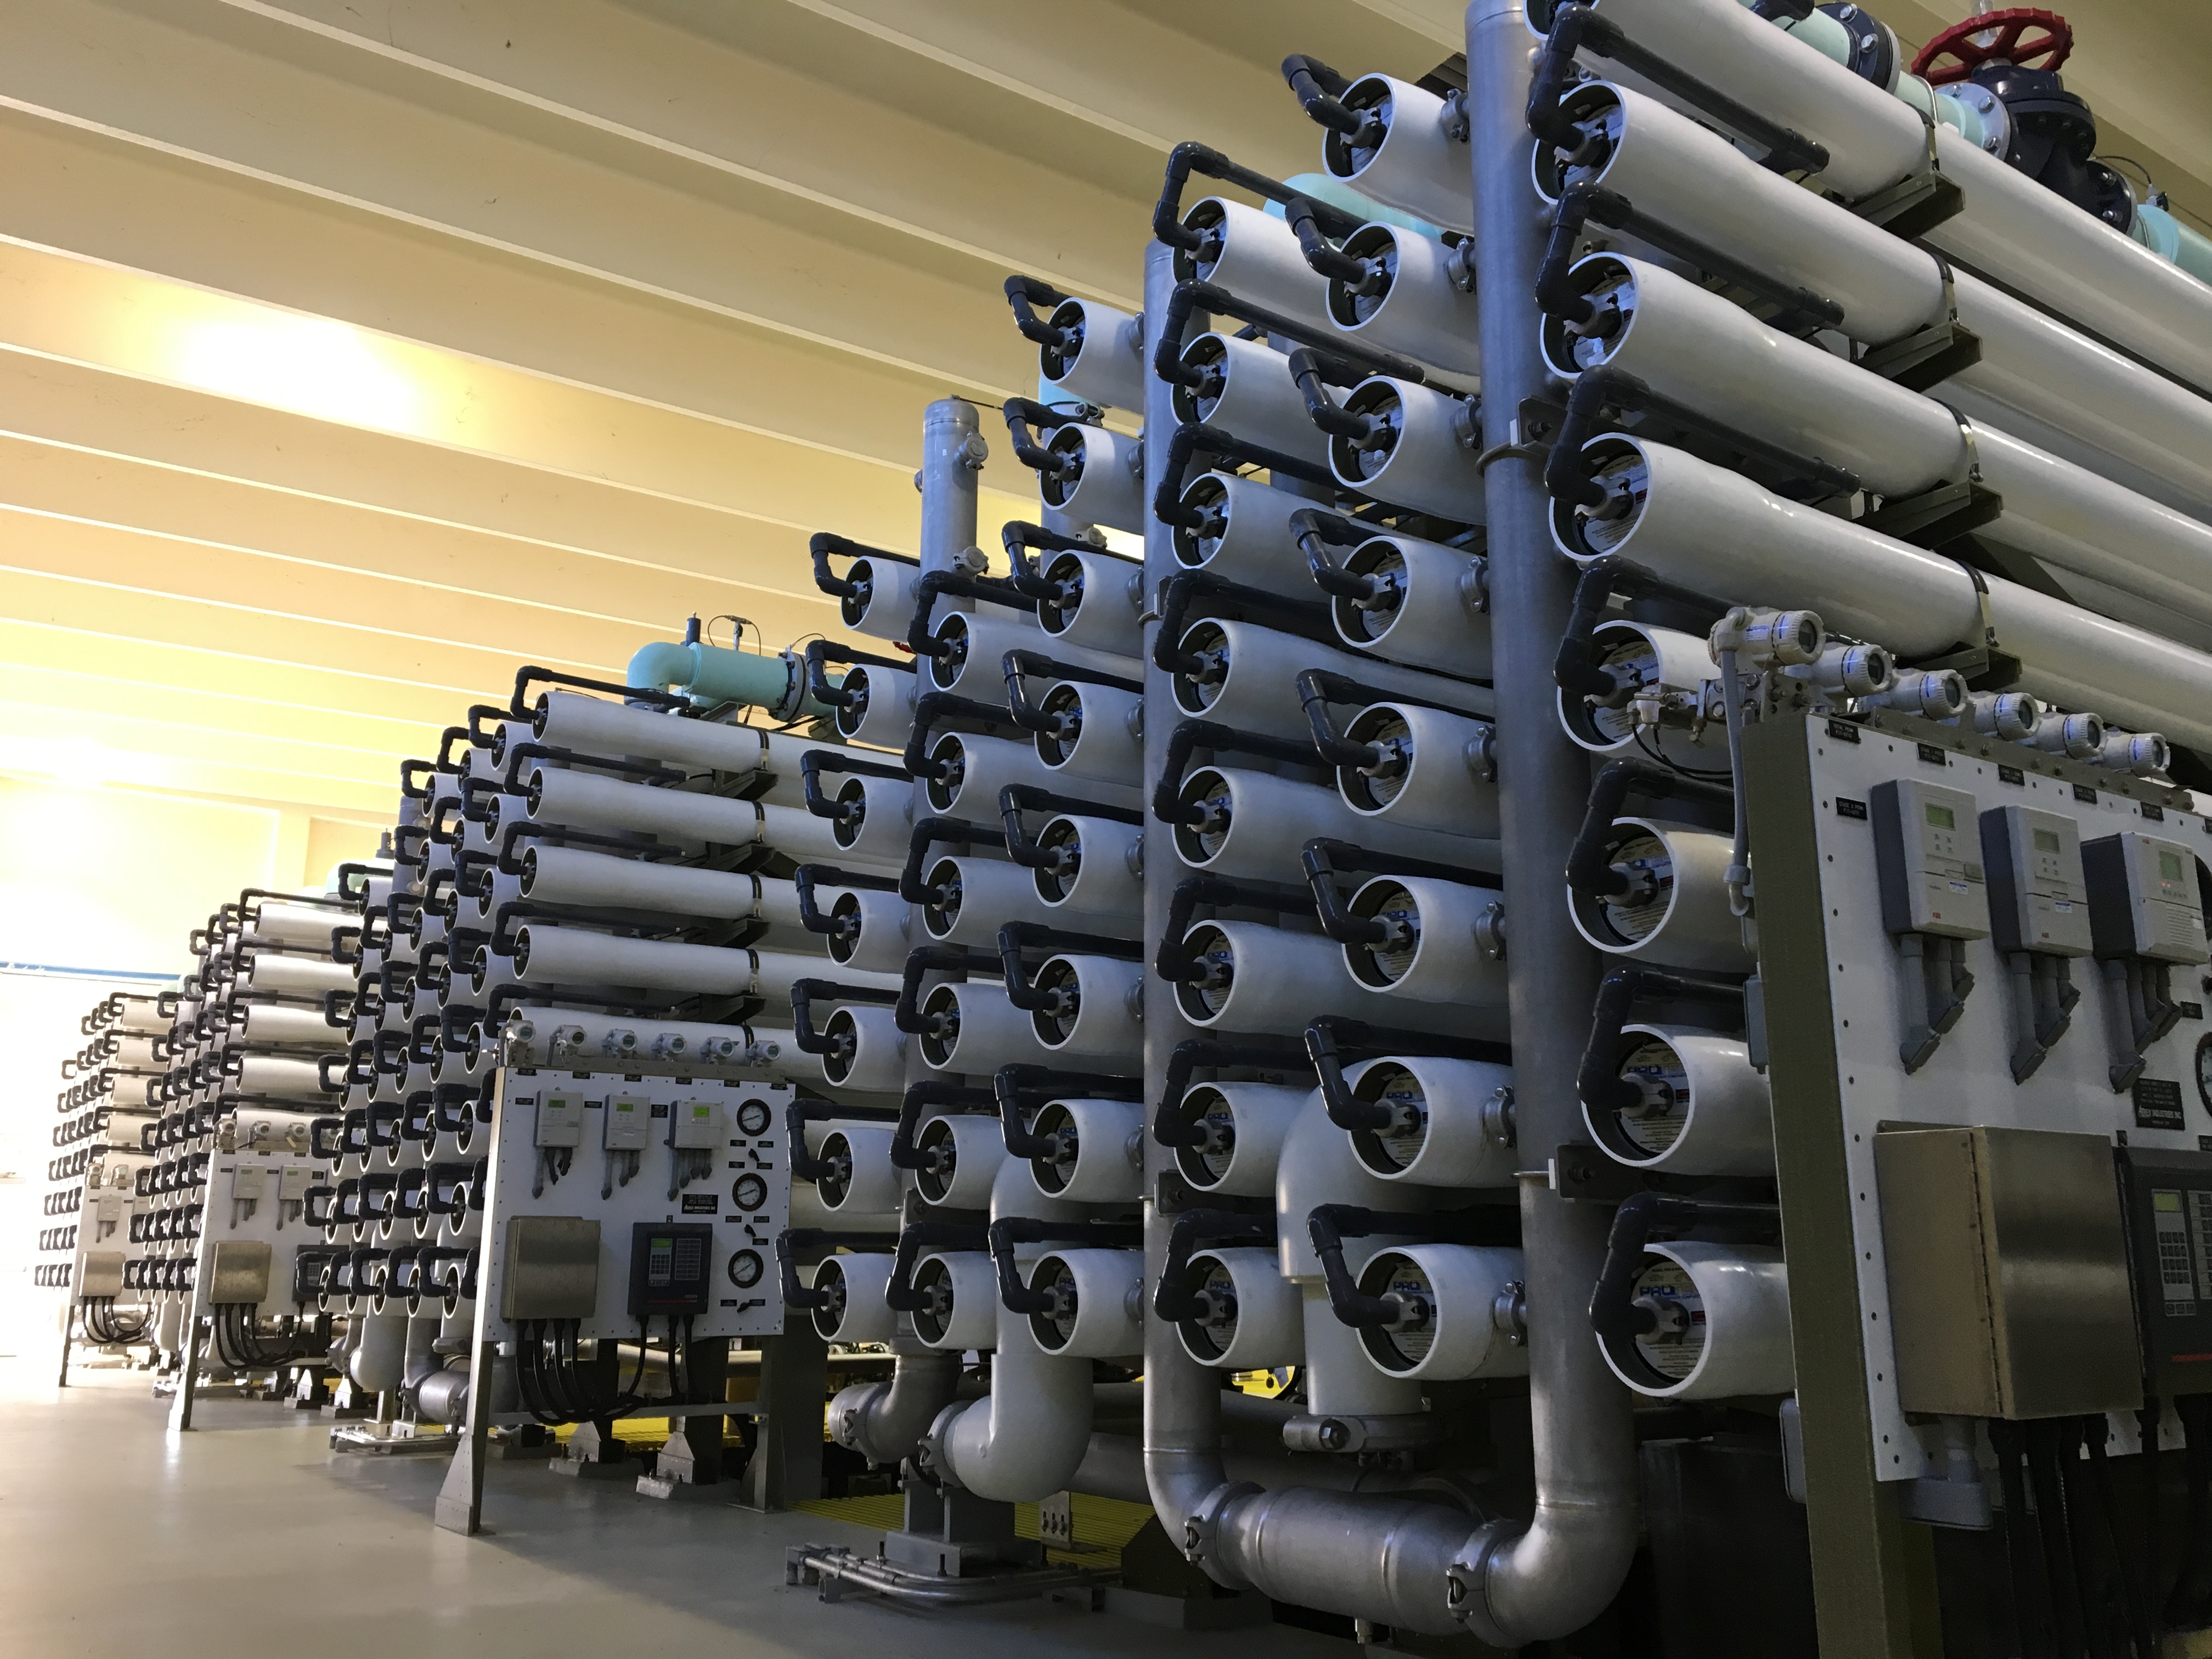 Reverse osmosis skids at James E. Anderson Water Treatment Plant